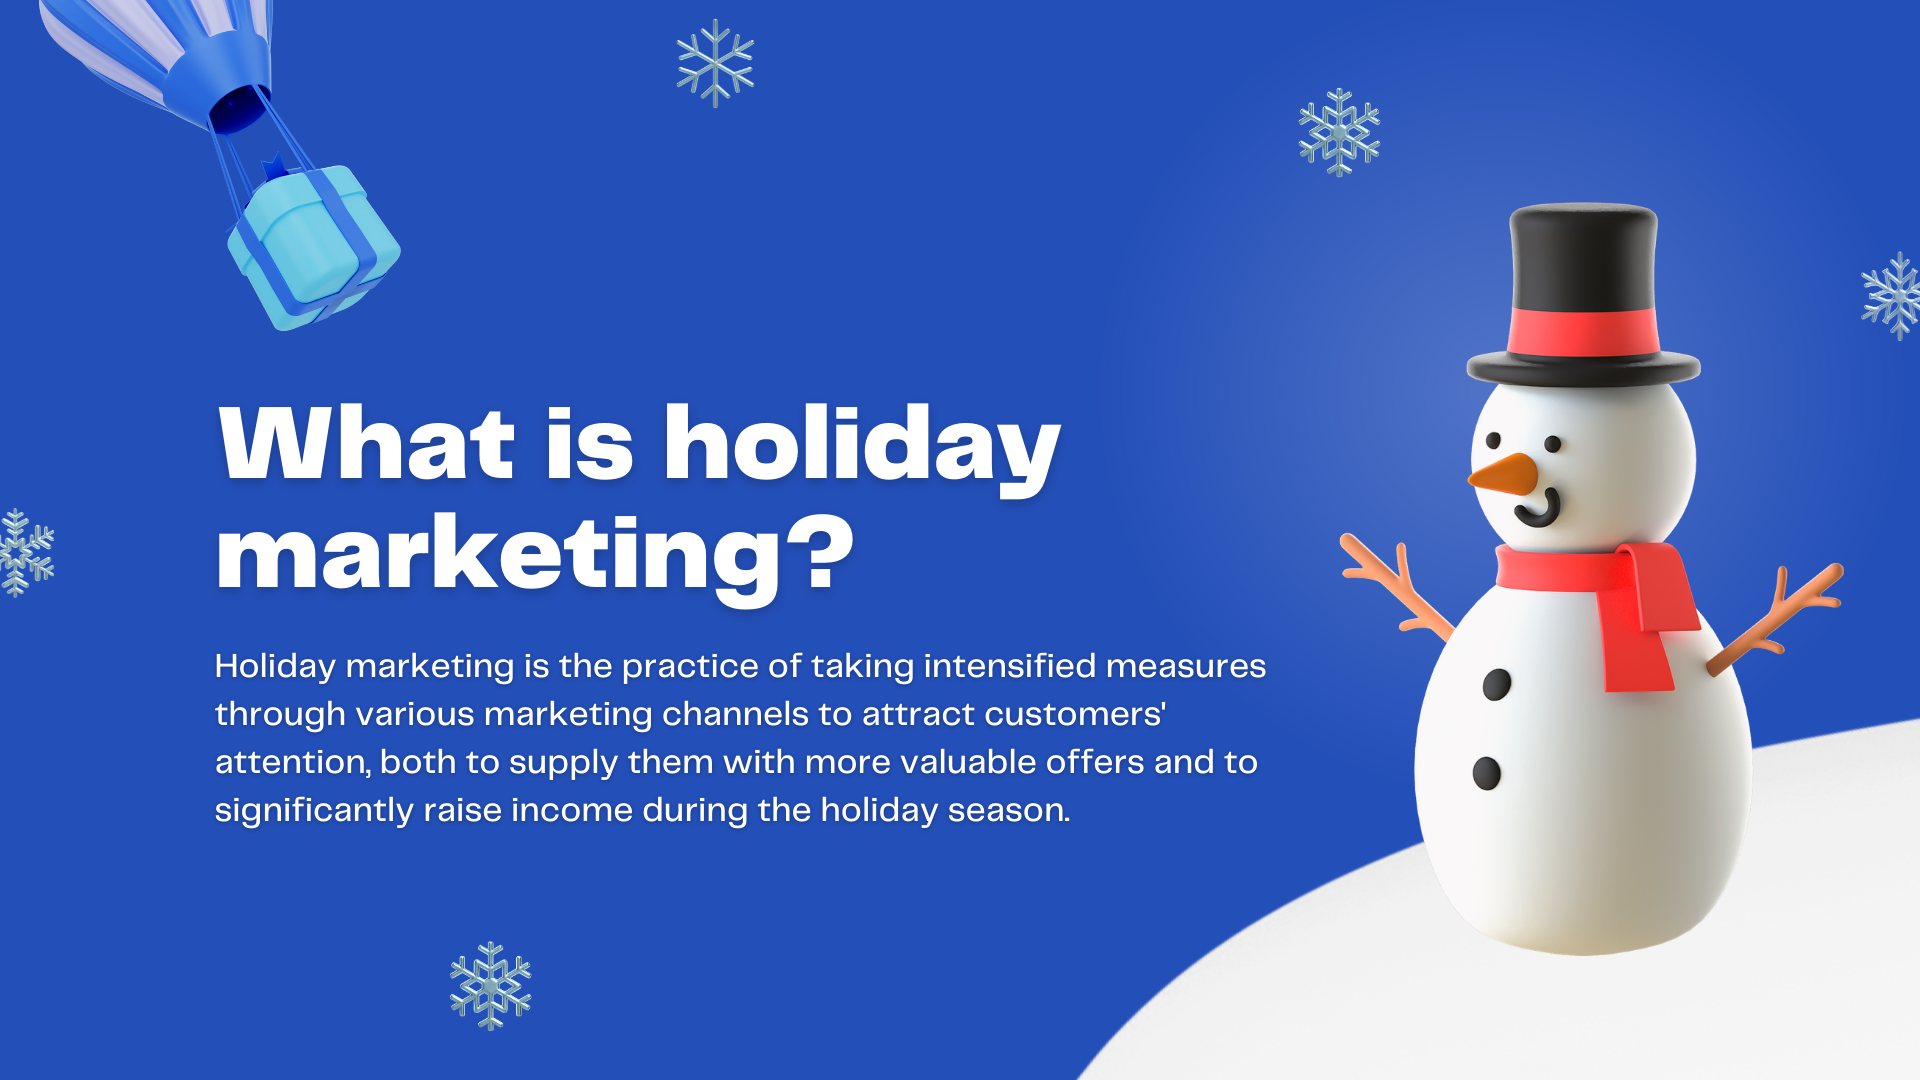 What is holiday marketing